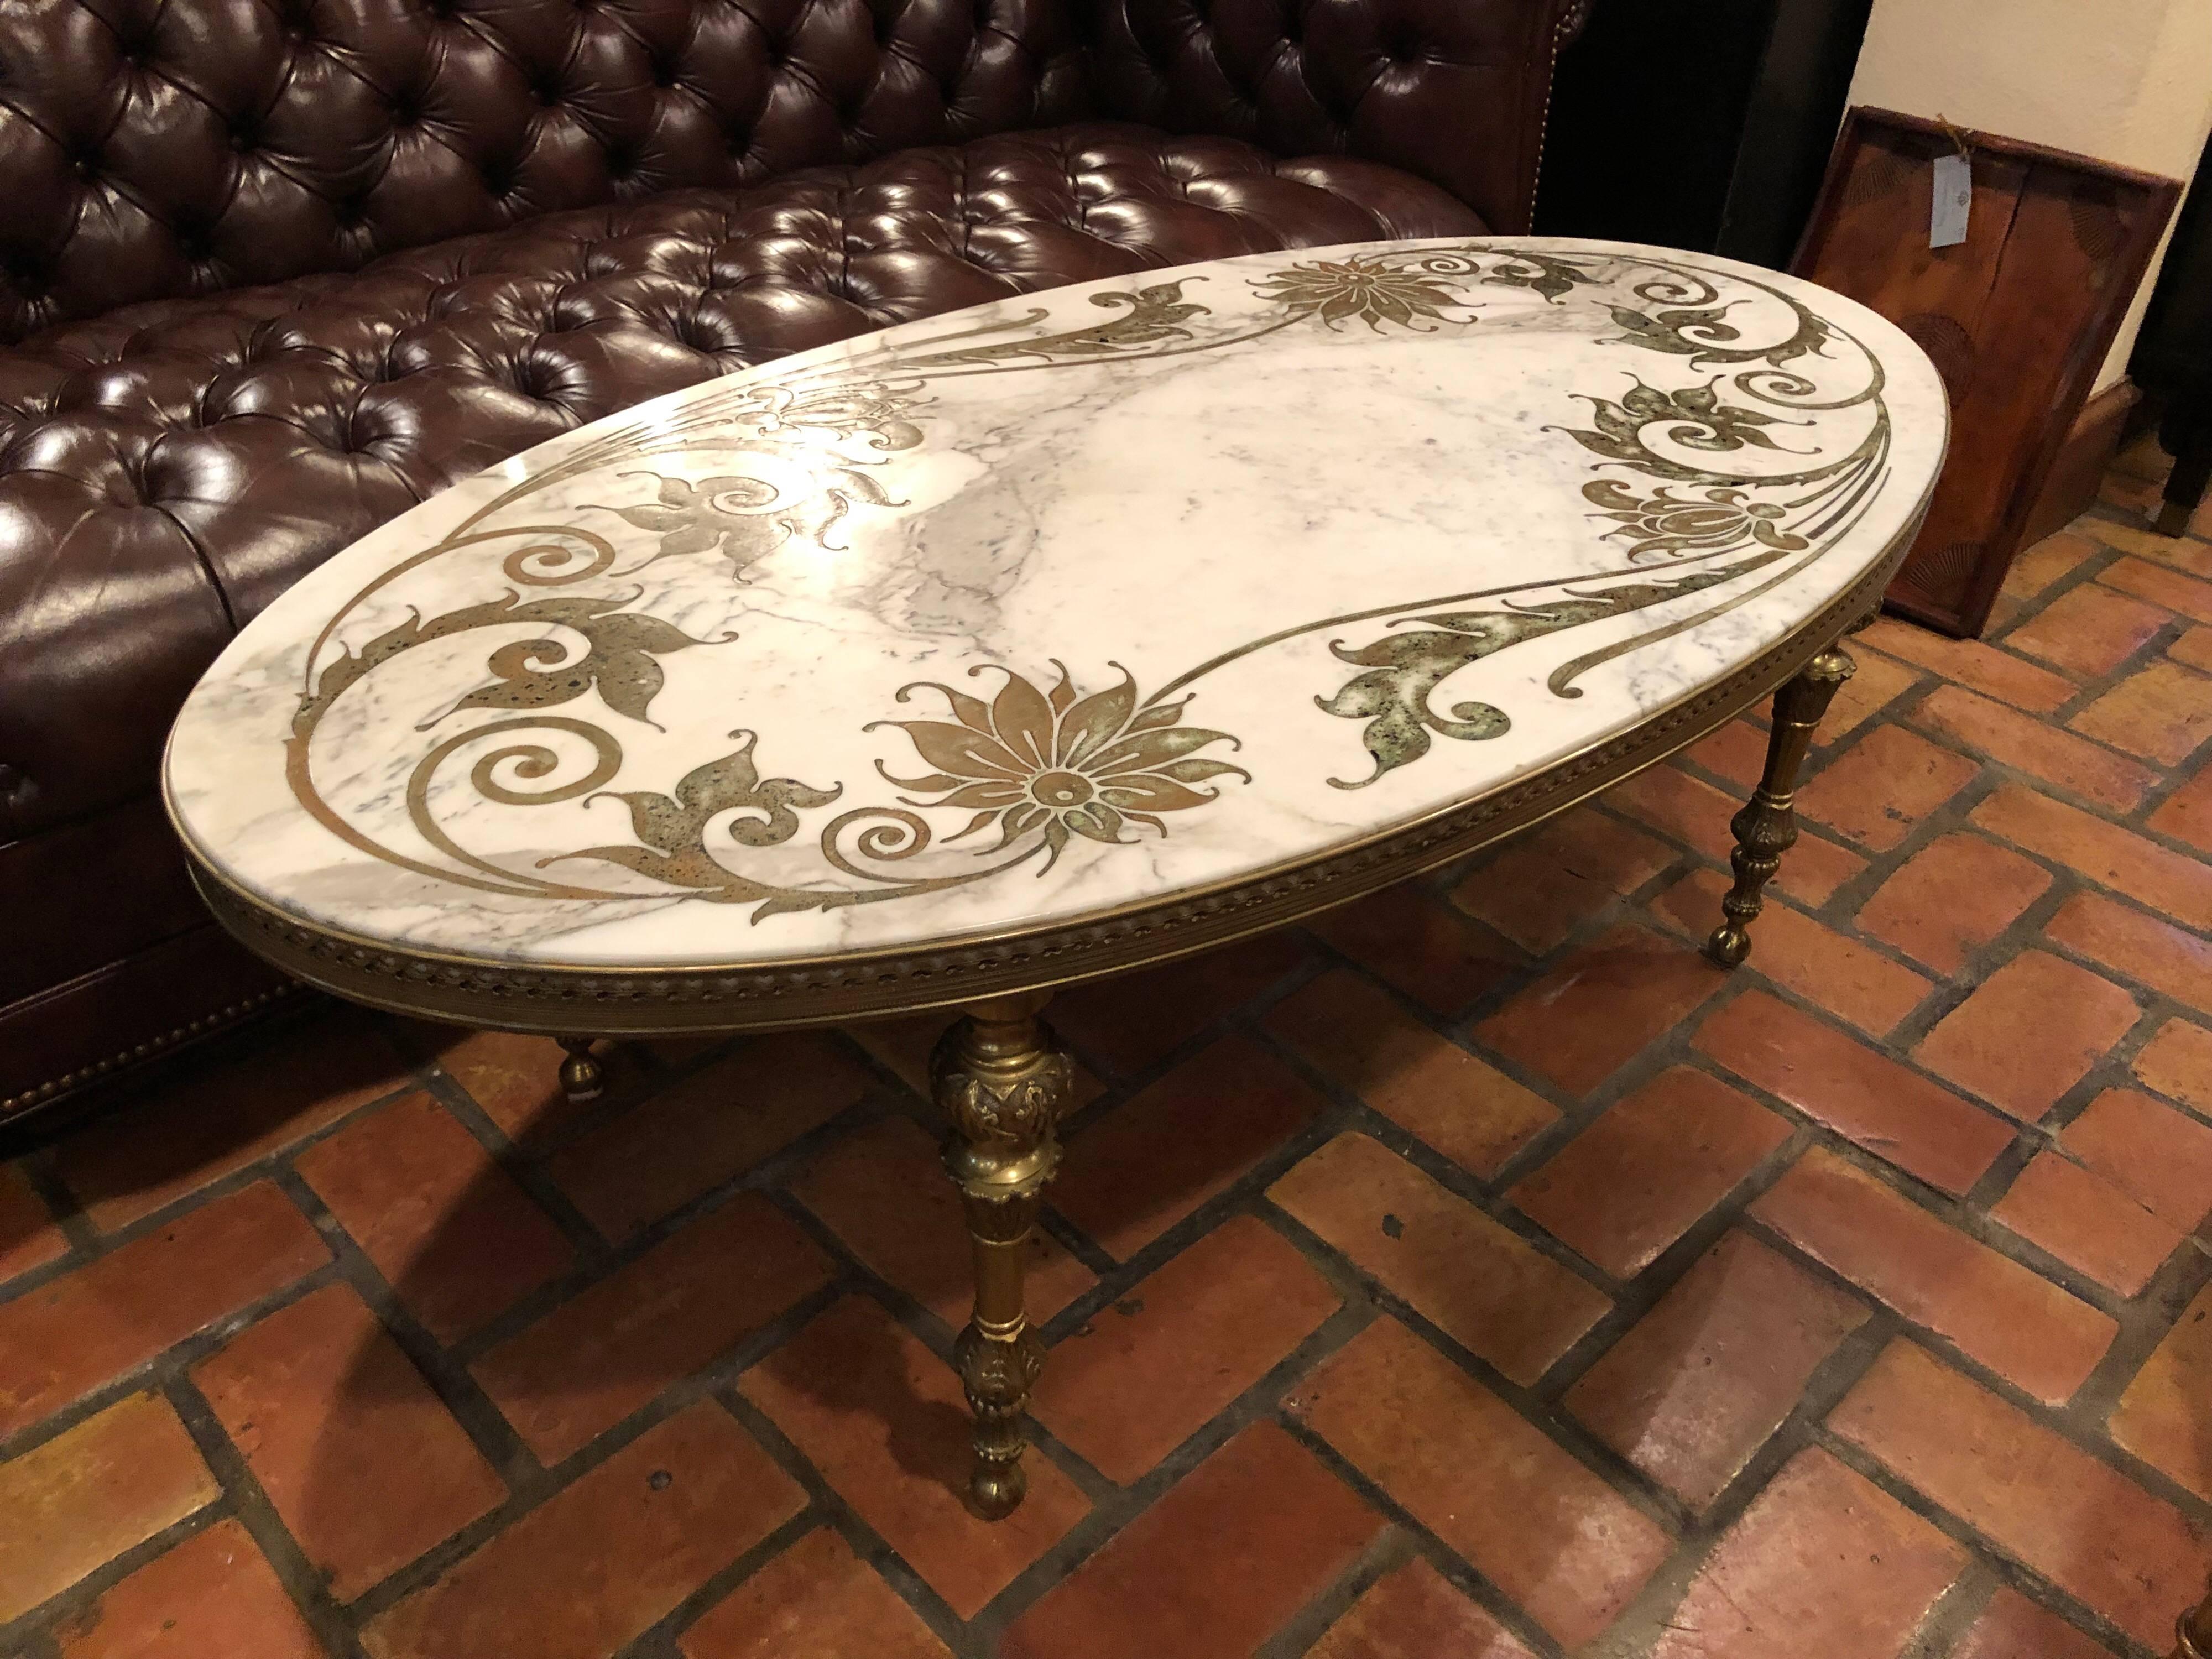 Hollywood Regency marble-top coffee table with inlay. Elegant and special this oval table will complement any living room space. Brass turned legs with a fitted and enclosed brass gallery for the marble top. Gorgeous designed inlay to marble top.